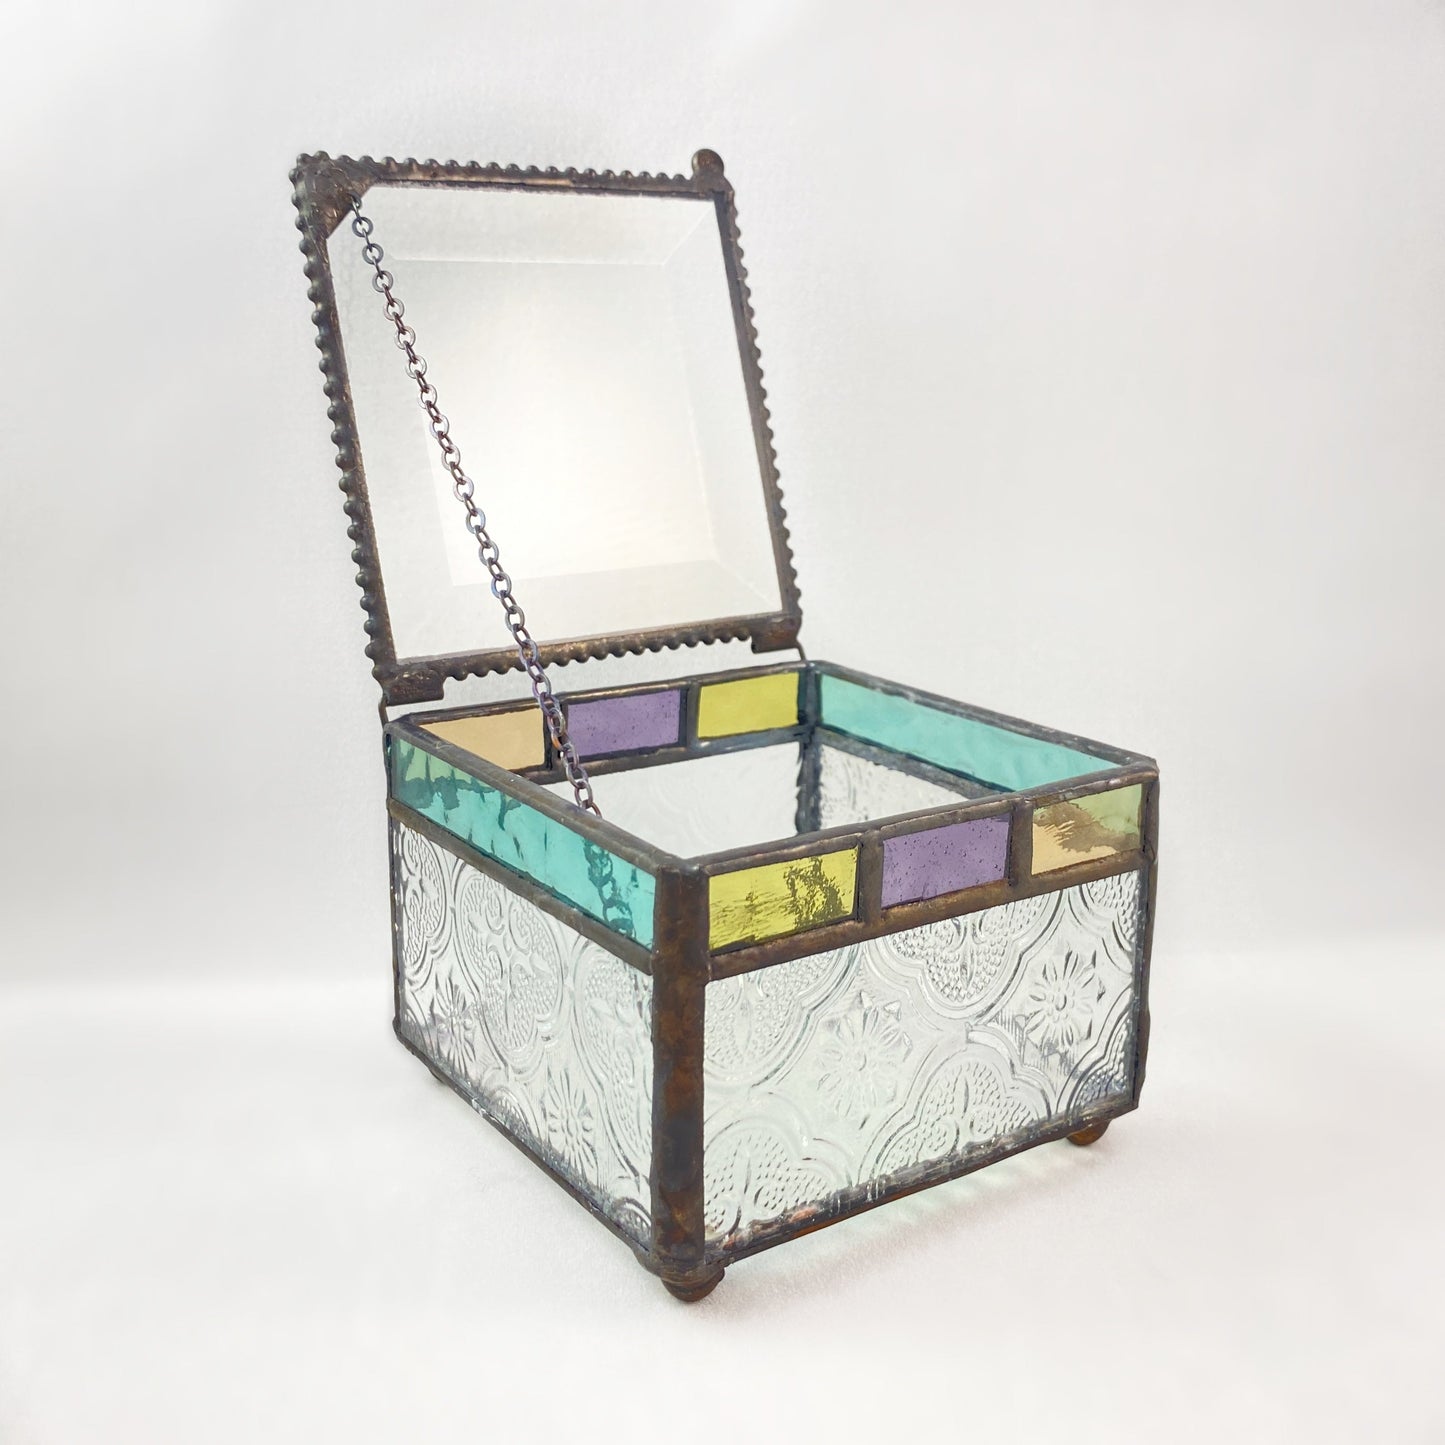 Stained Glass Jewelry Box - Square Keepsake Box with Lace